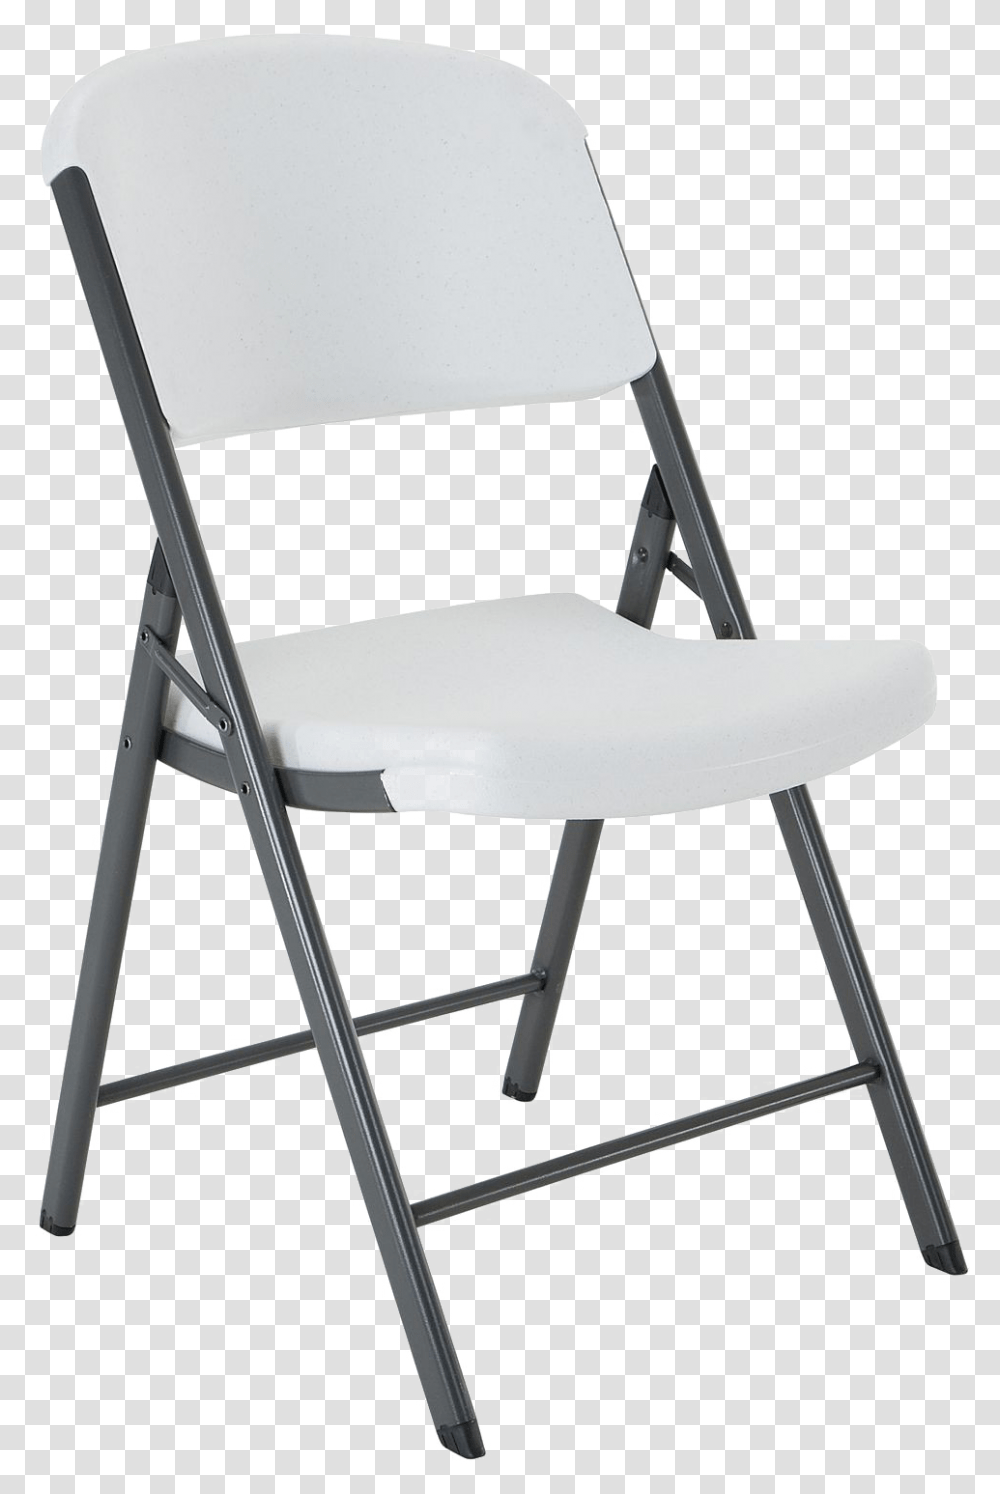 Folding Chair File White Granite Folding Chairs, Furniture, Canvas Transparent Png